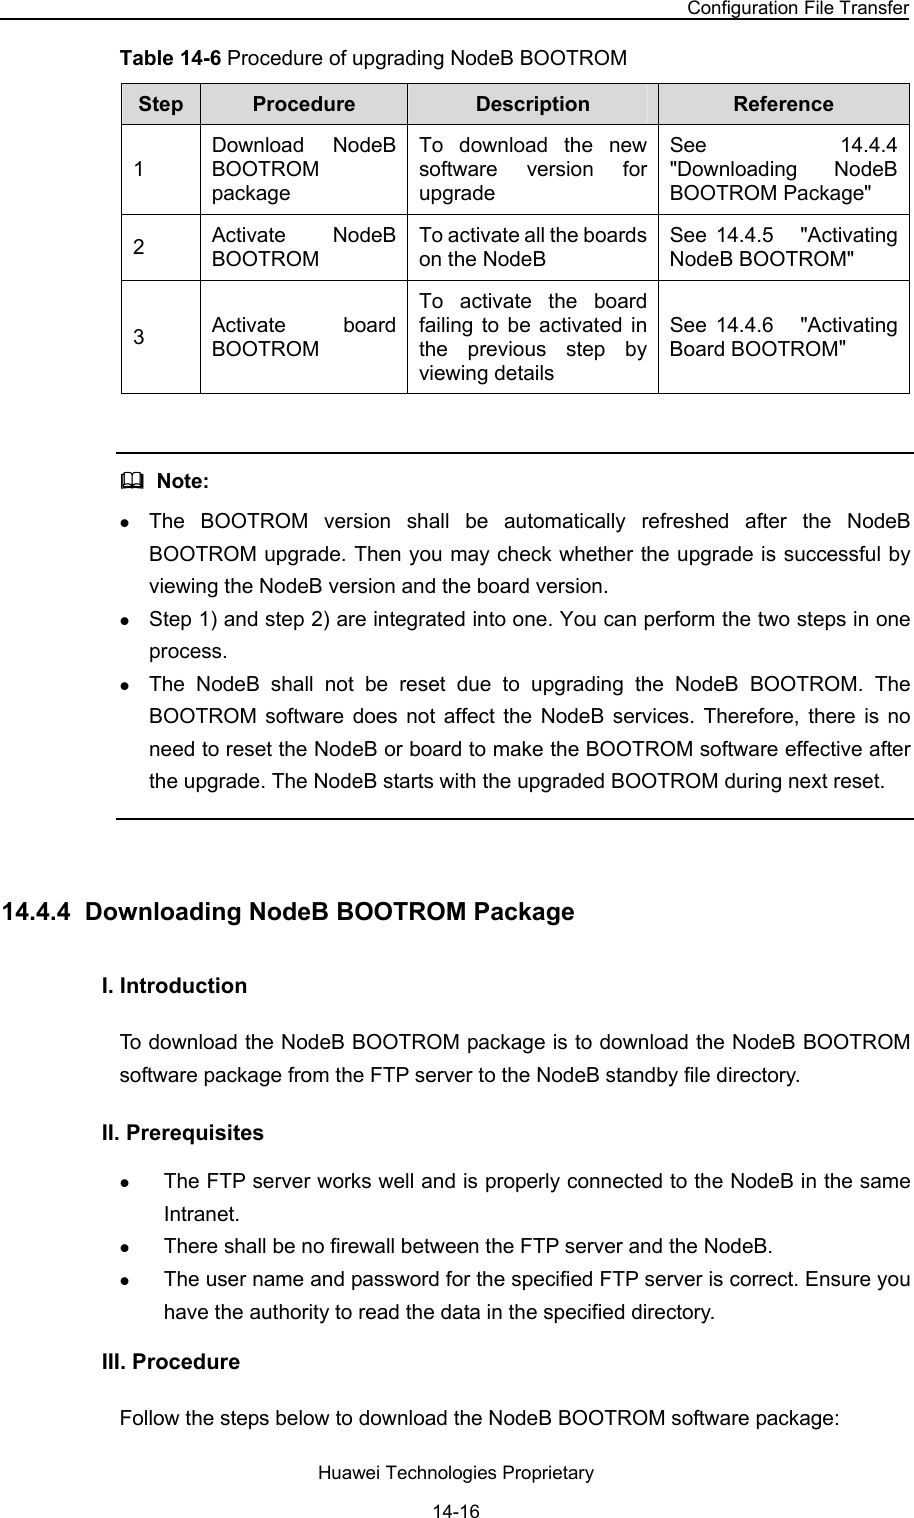 NodeB LMT User Guide Chapter 14  NodeB Software Update and Data Configuration File Transfer Huawei Technologies Proprietary 14-16 Table 14-6 Procedure of upgrading NodeB BOOTROM  Step   Procedure   Description   Reference  1 Download NodeB BOOTROM package To download the new software version for upgrade See  14.4.4  &quot;Downloading NodeB BOOTROM Package&quot; 2  Activate NodeB BOOTROM To activate all the boards on the NodeB  See  14.4.5   &quot;Activating NodeB BOOTROM&quot; 3  Activate board BOOTROM To activate the board failing to be activated in the previous step by viewing details  See  14.4.6   &quot;Activating Board BOOTROM&quot;    Note:  z The BOOTROM version shall be automatically refreshed after the NodeB BOOTROM upgrade. Then you may check whether the upgrade is successful by viewing the NodeB version and the board version.  z Step 1) and step 2) are integrated into one. You can perform the two steps in one process.  z The NodeB shall not be reset due to upgrading the NodeB BOOTROM. The BOOTROM software does not affect the NodeB services. Therefore, there is no need to reset the NodeB or board to make the BOOTROM software effective after the upgrade. The NodeB starts with the upgraded BOOTROM during next reset.   14.4.4  Downloading NodeB BOOTROM Package  I. Introduction  To download the NodeB BOOTROM package is to download the NodeB BOOTROM software package from the FTP server to the NodeB standby file directory. II. Prerequisites z The FTP server works well and is properly connected to the NodeB in the same Intranet.  z There shall be no firewall between the FTP server and the NodeB.  z The user name and password for the specified FTP server is correct. Ensure you have the authority to read the data in the specified directory.  III. Procedure Follow the steps below to download the NodeB BOOTROM software package:  